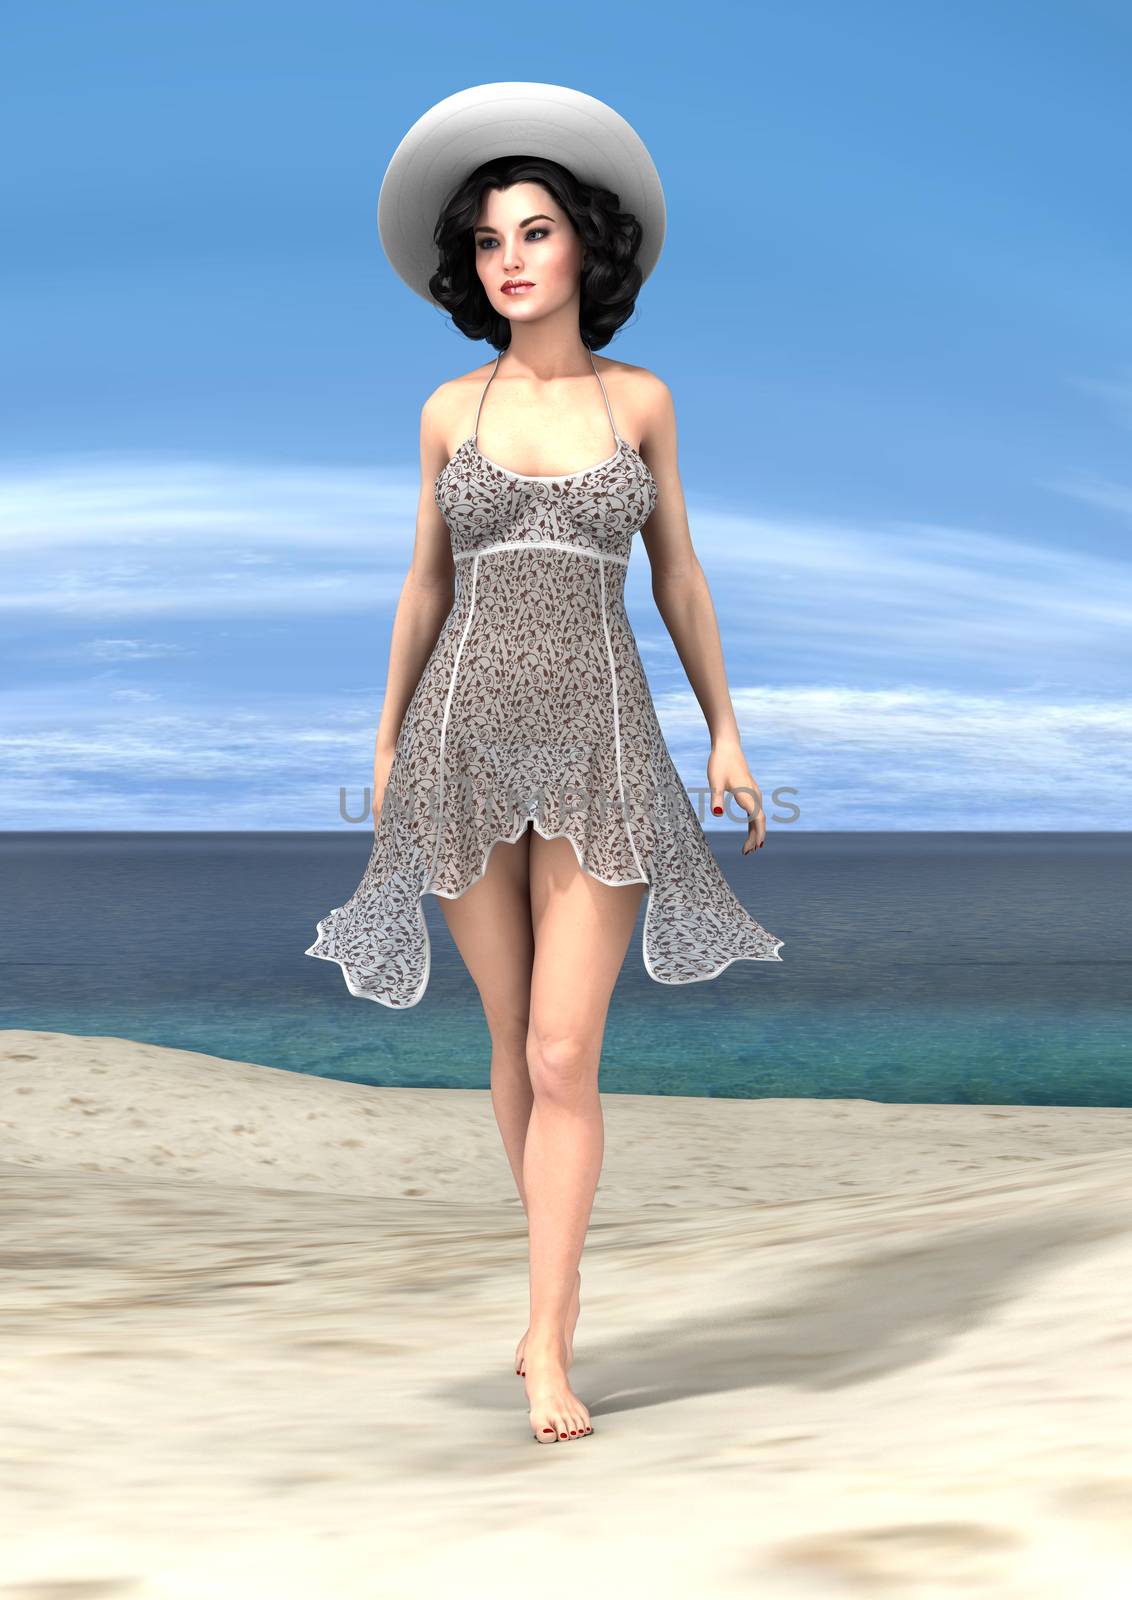 3D digital render of a beautiful young woman wearing a summer dress and a hat on  blue sky and ocean background 